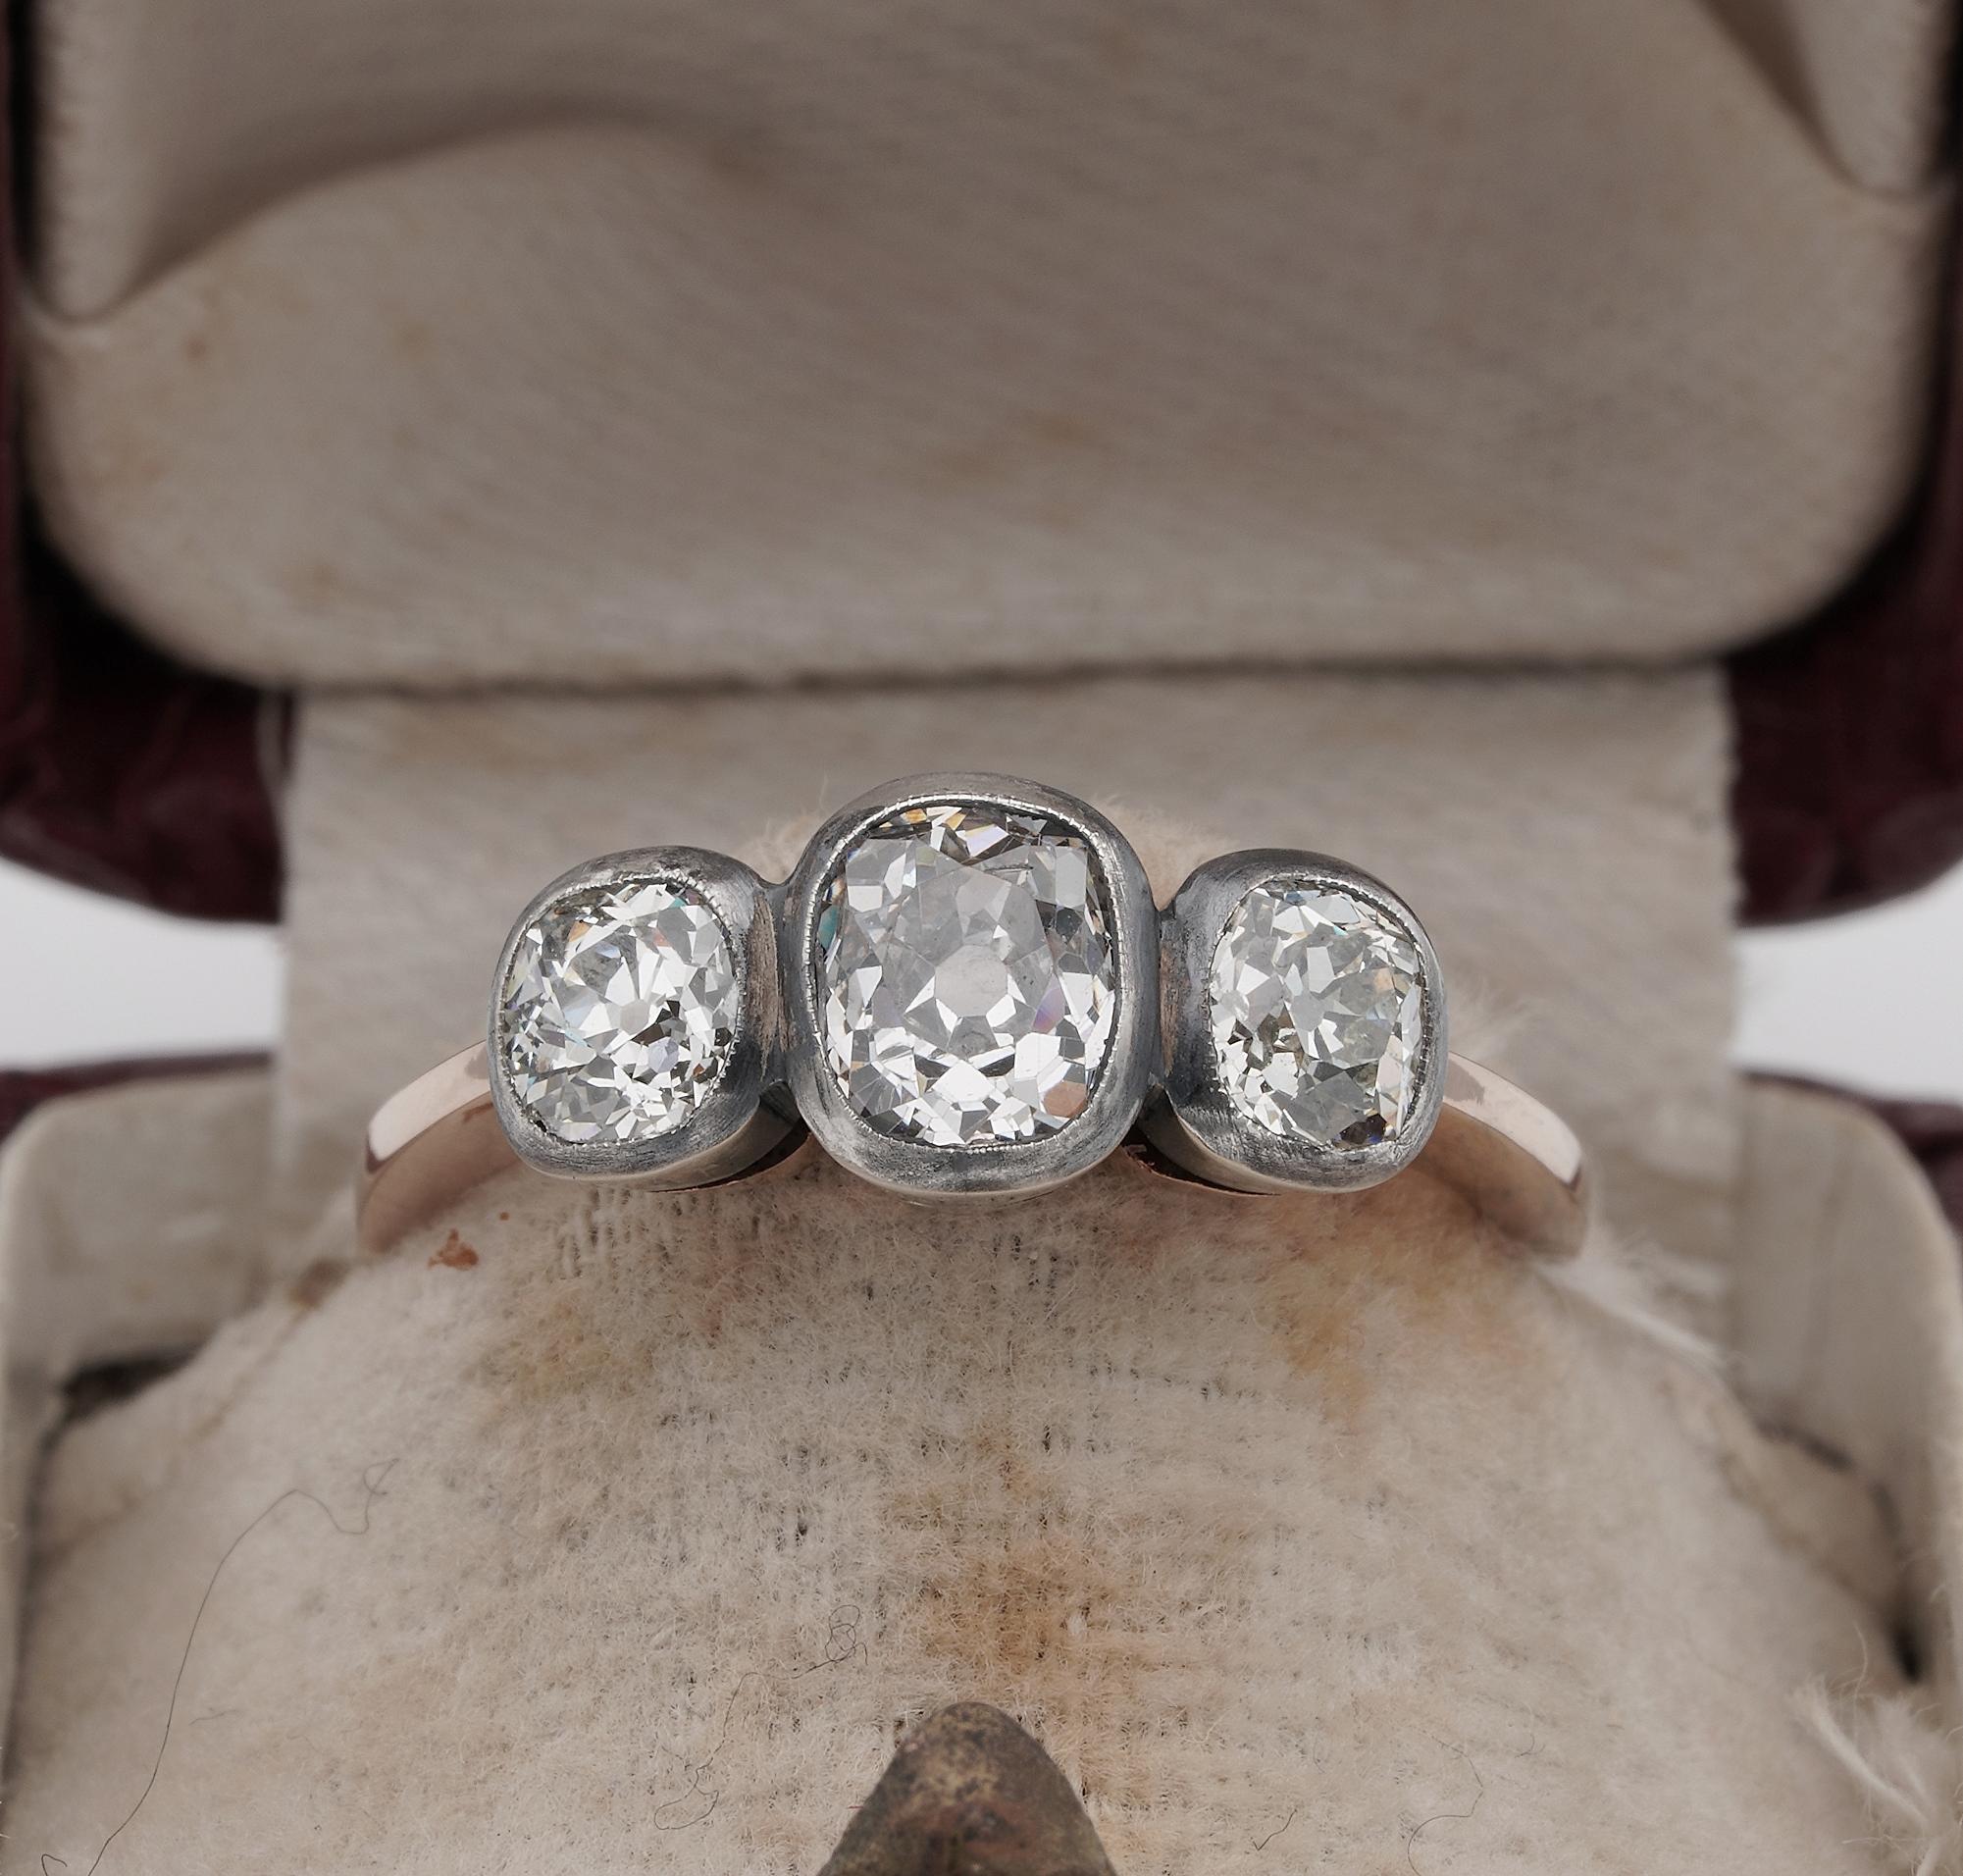 Victorian Statement

Victorian nineteenth century rings with their own distinctive individual mellow charm are much sought and loved for their individual beauty, romance and history
This absolutely beautiful example is 1880 ca
Simple yet effective